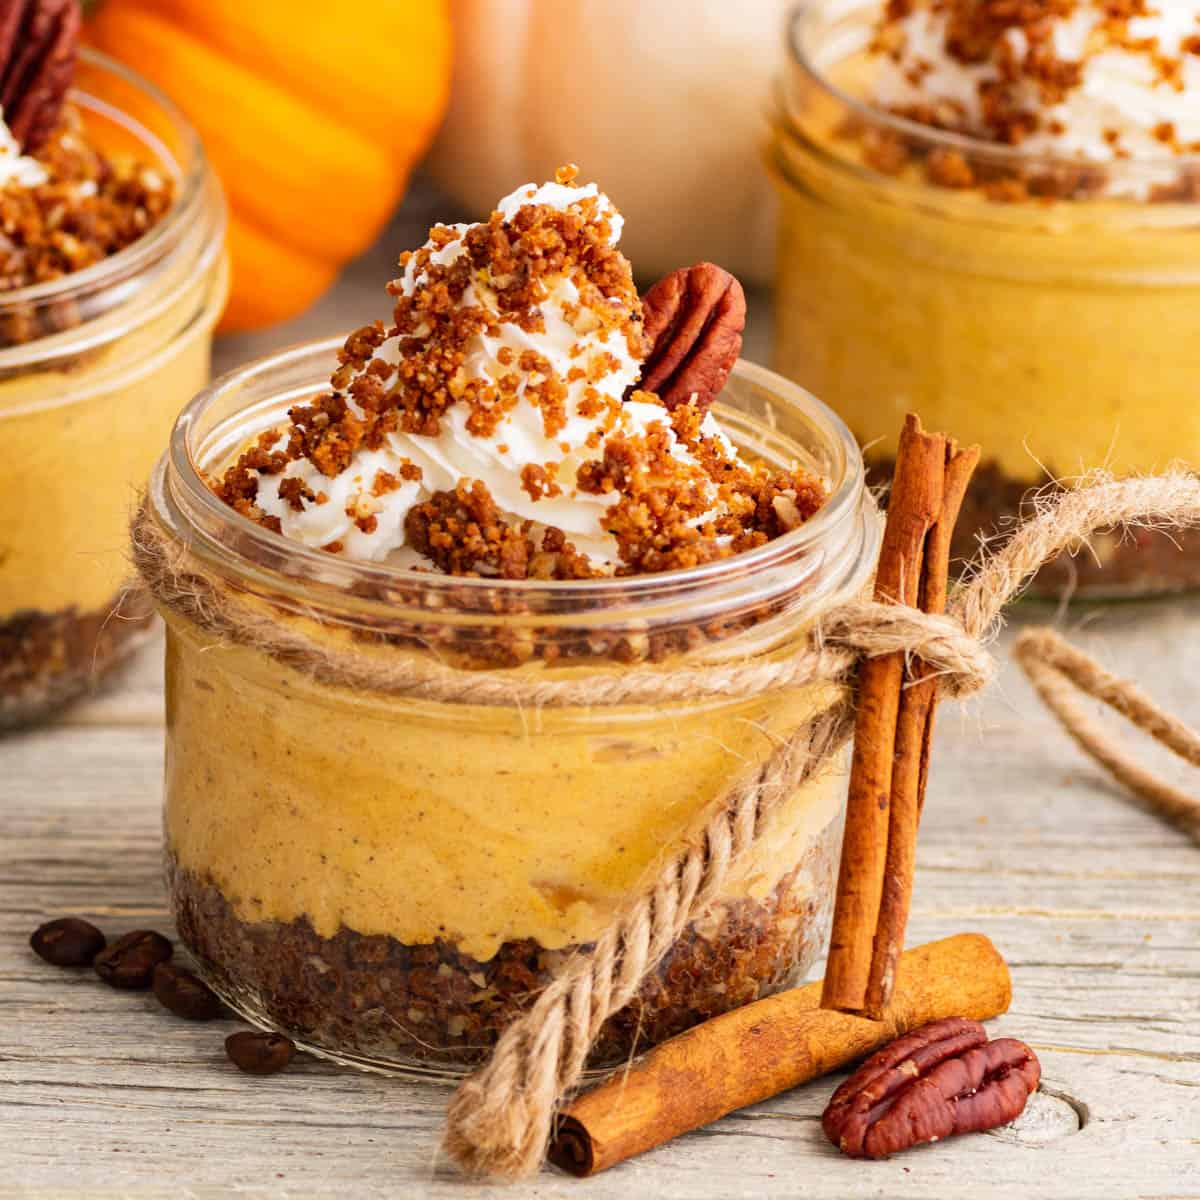 Three individually sized Pumpkin Delight desserts topped with gingersnap crumbs and pecans sit amongst decorative pumpkins.